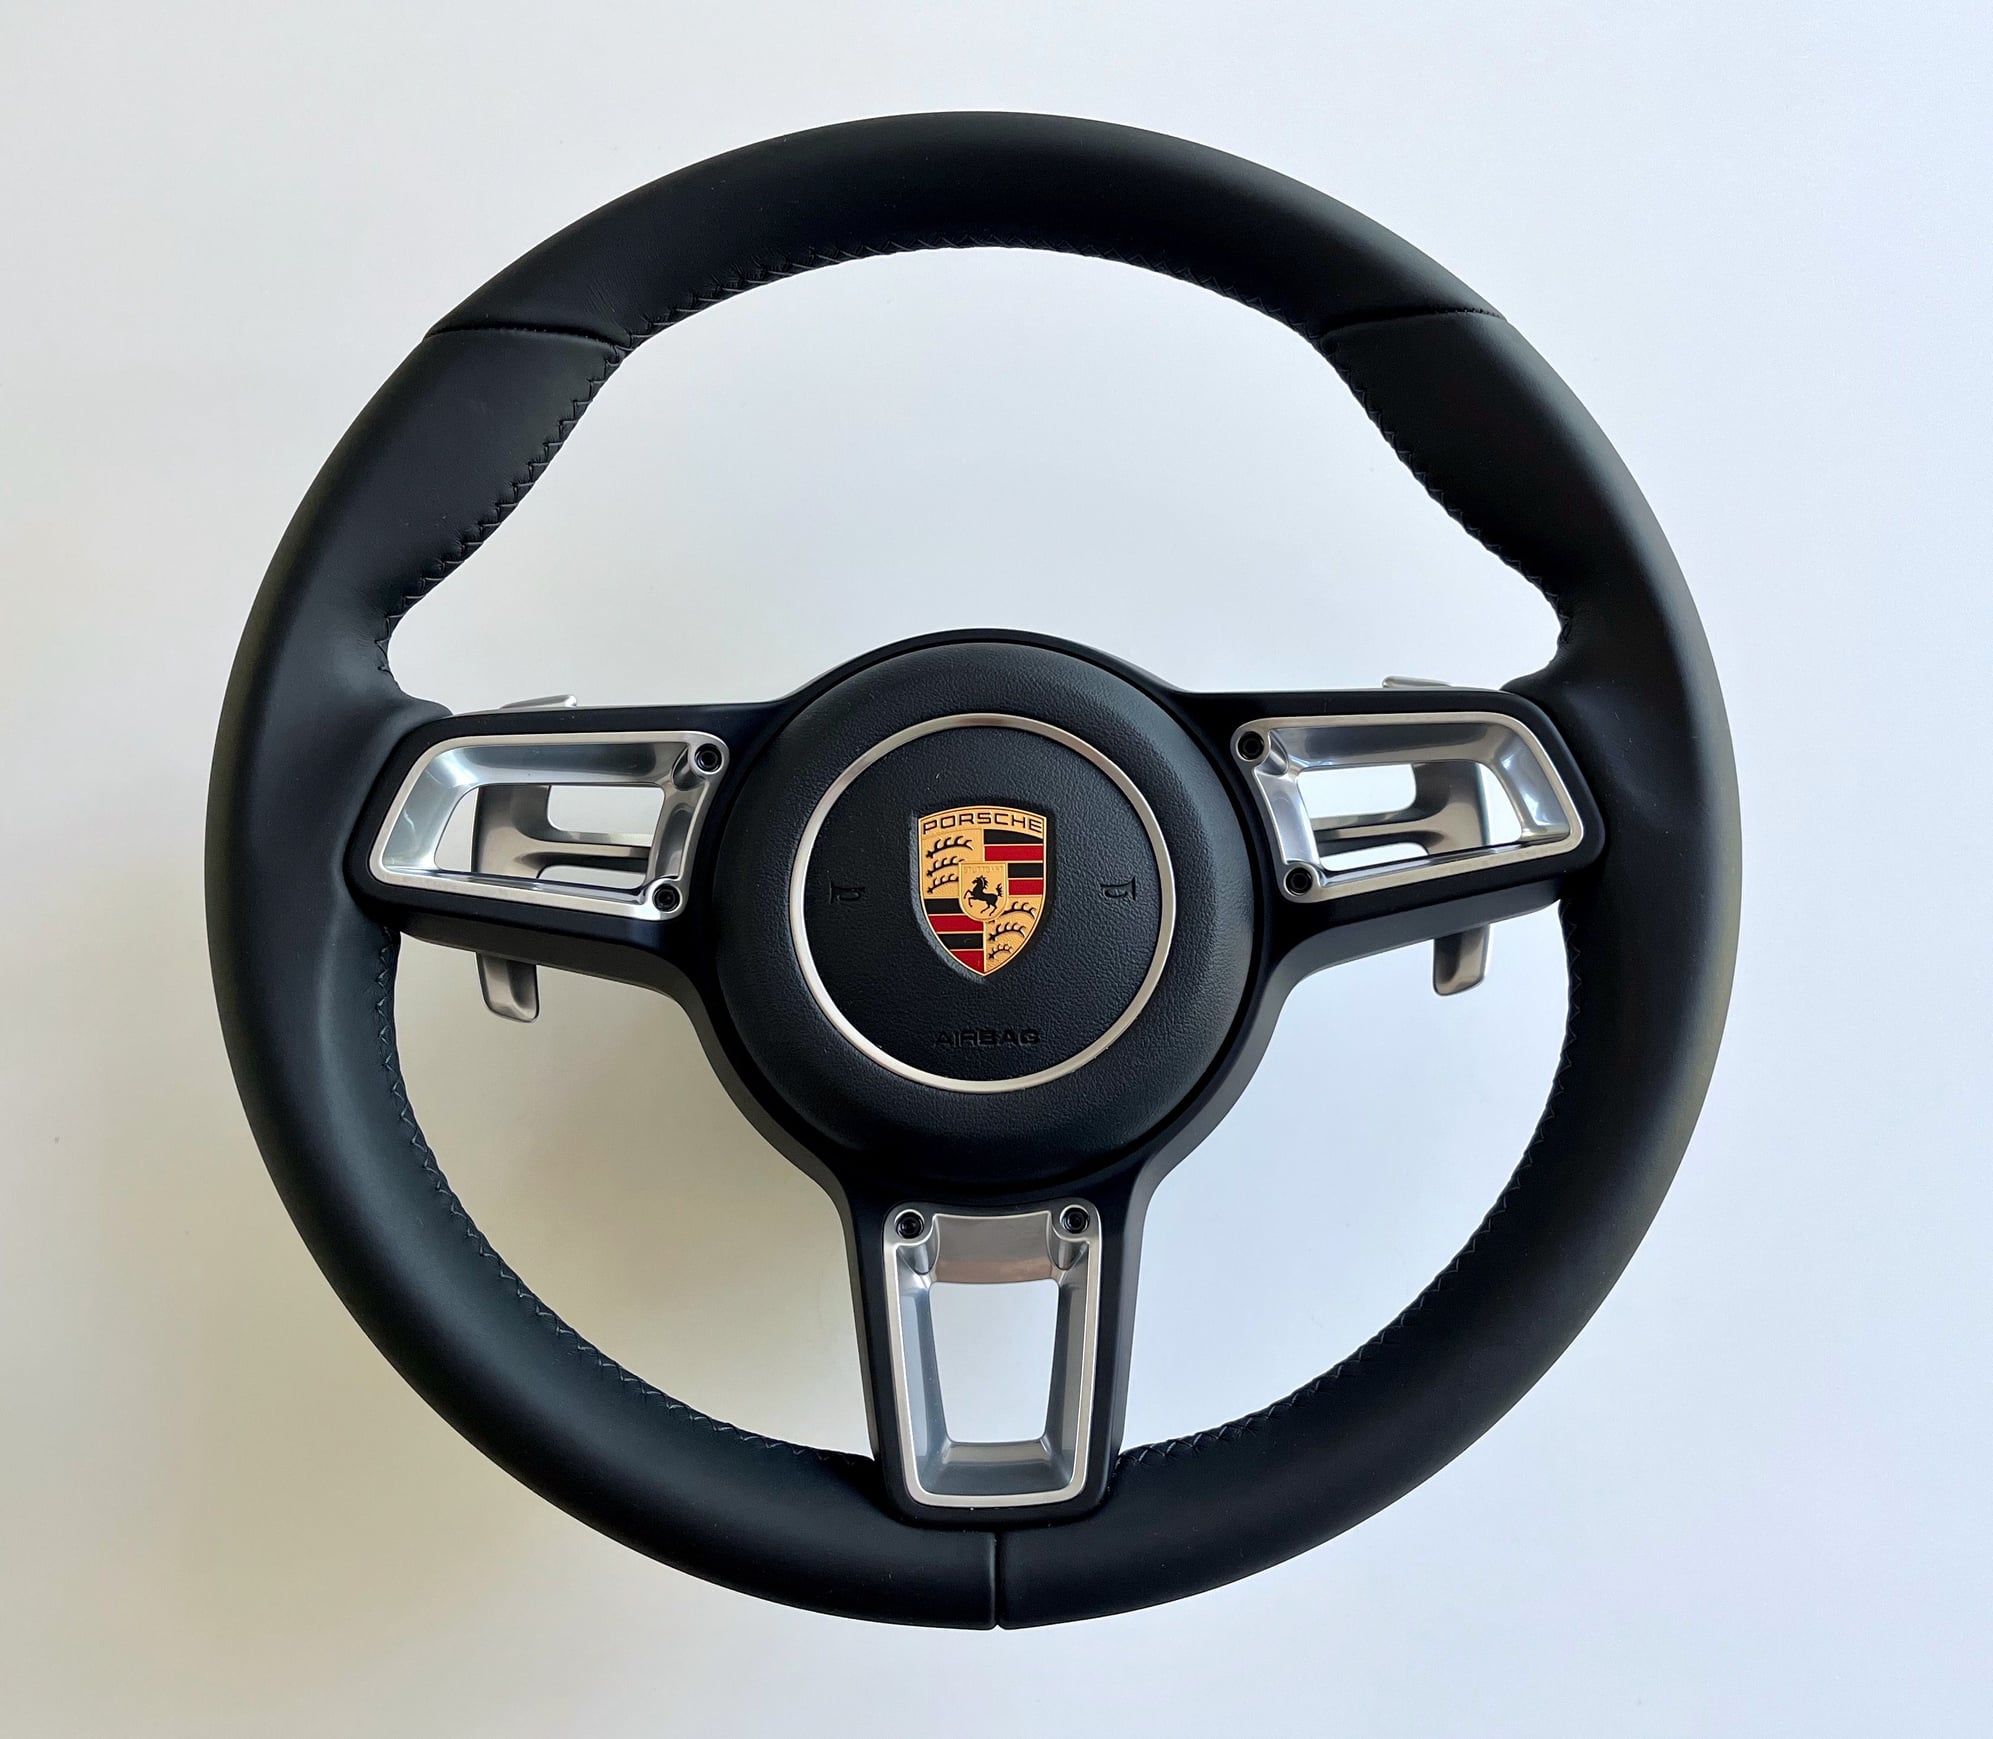 Interior/Upholstery - Porsche 991.2 GT Sport PDK Steering Wheel & Airbag 9P1419091MKA34 - Used - 2009 to 2019 Porsche 911 - Vancouver, BC V6J1T5, Canada